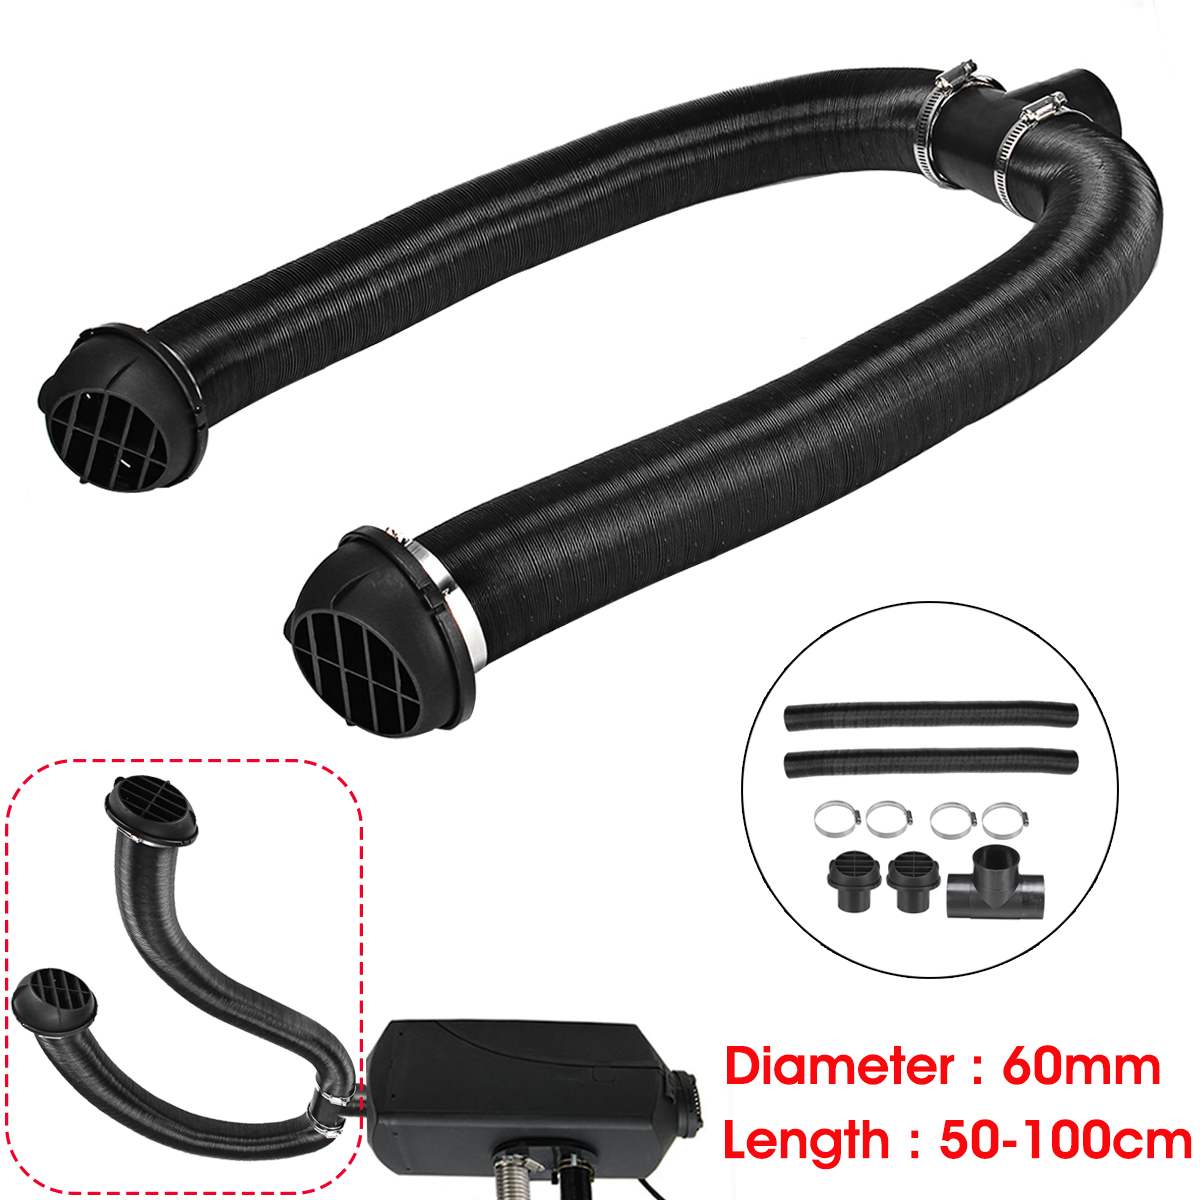 JUSTJUNMIN 50-100cm 75mm Car Heater Ducting Pipe Diesel Parking Heater Air Vent Outlet Y Piece Connector Fit for Webasto Dometic Planer Car Heater Parts